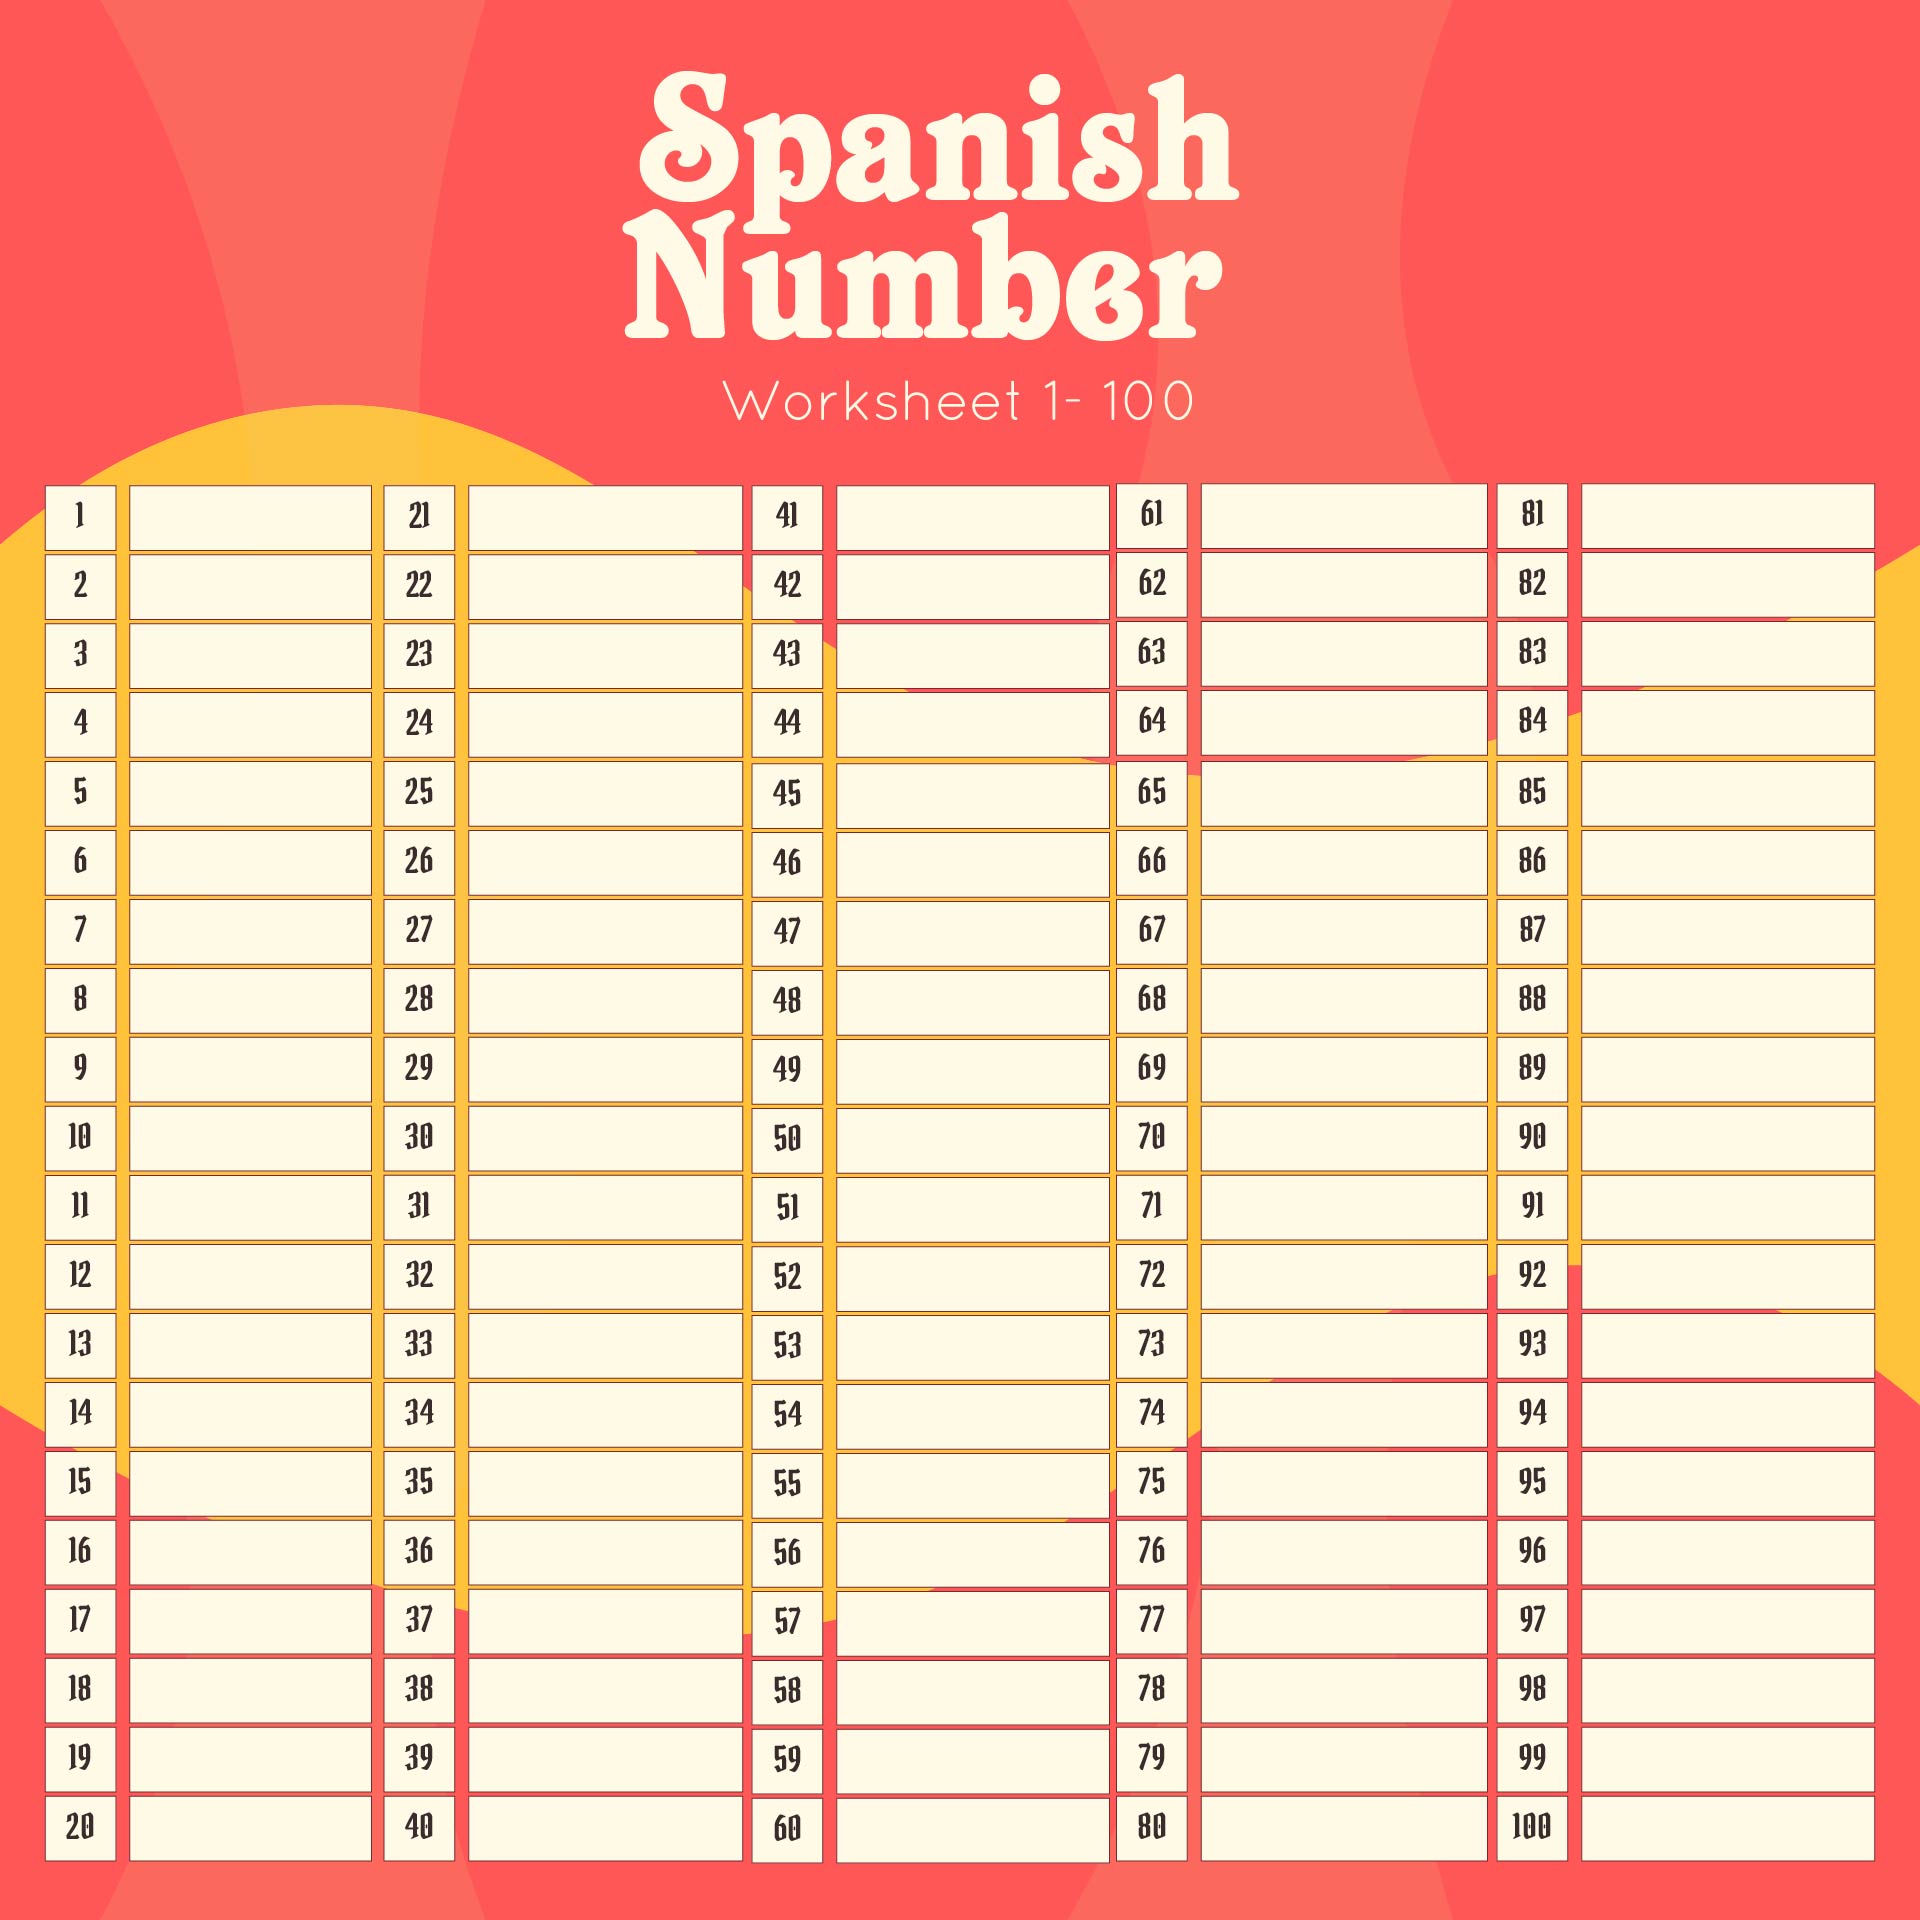 6-best-images-of-spanish-numbers-1-100-chart-printable-spanish-spanish-numbers-worksheet-1-100